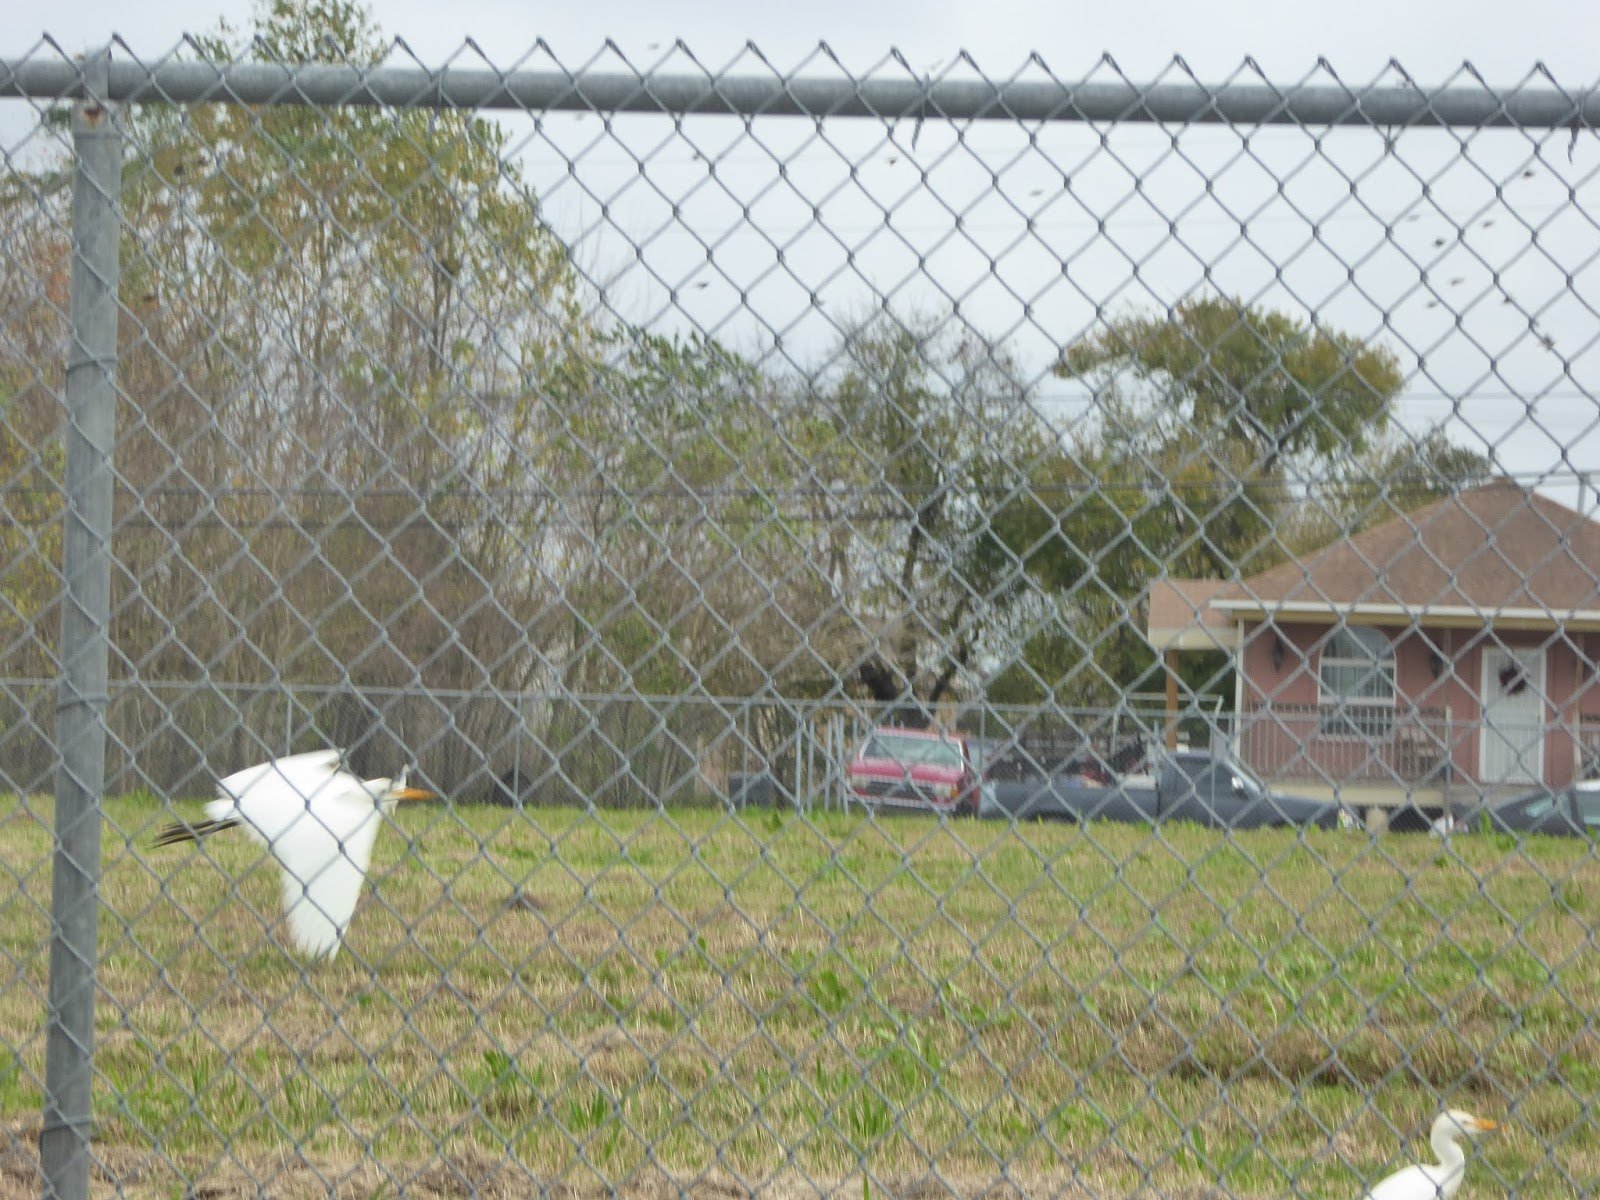  A renewed home with vacant lot and egrets    